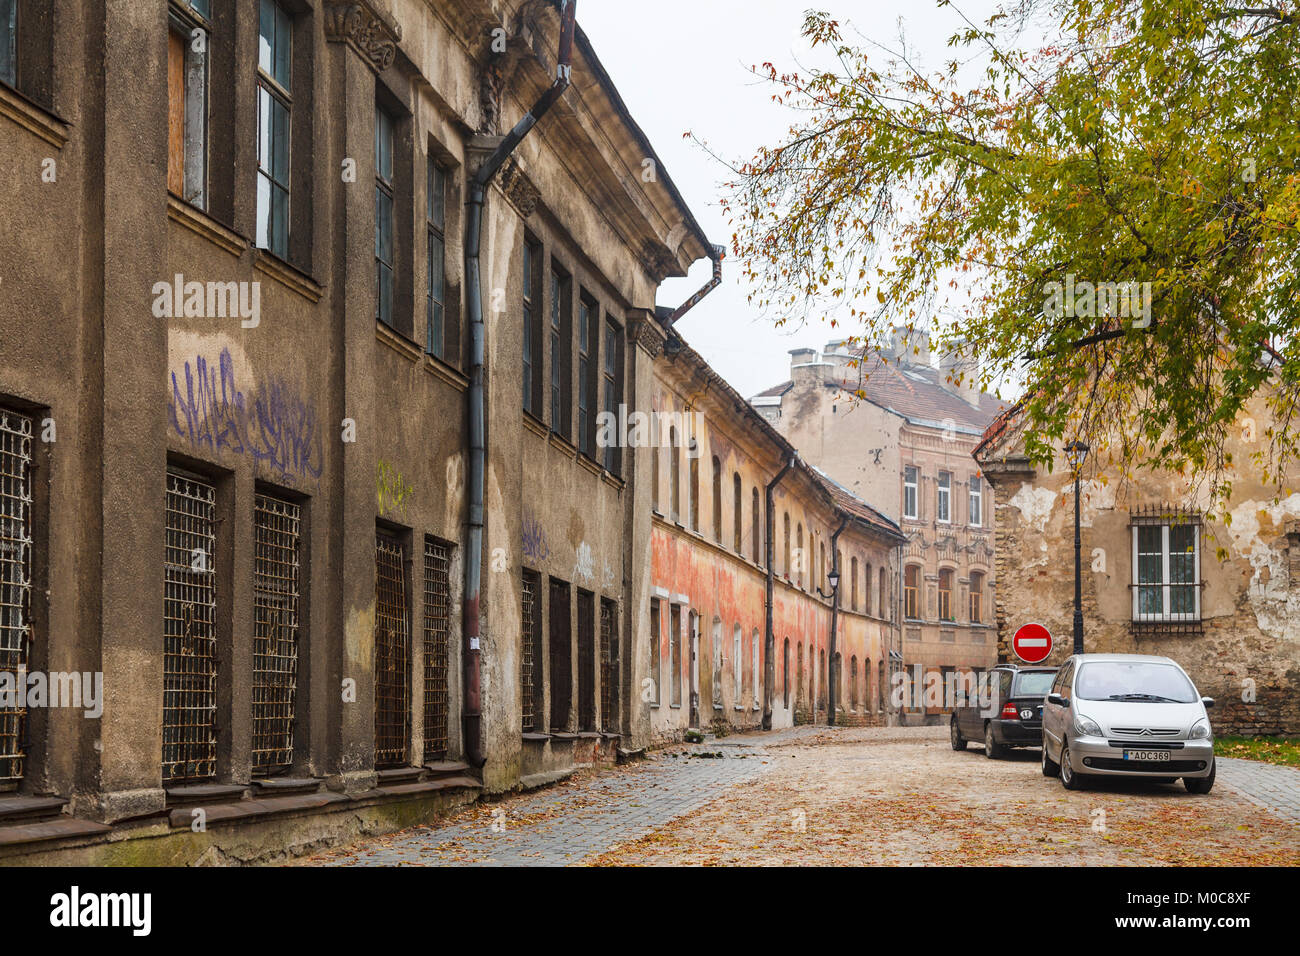 Dilapidated, run-down side street of empty old terraced houses with crumbling brickwork in Vilnius Old Town, capital city of Lithuania, eastern Europe Stock Photo